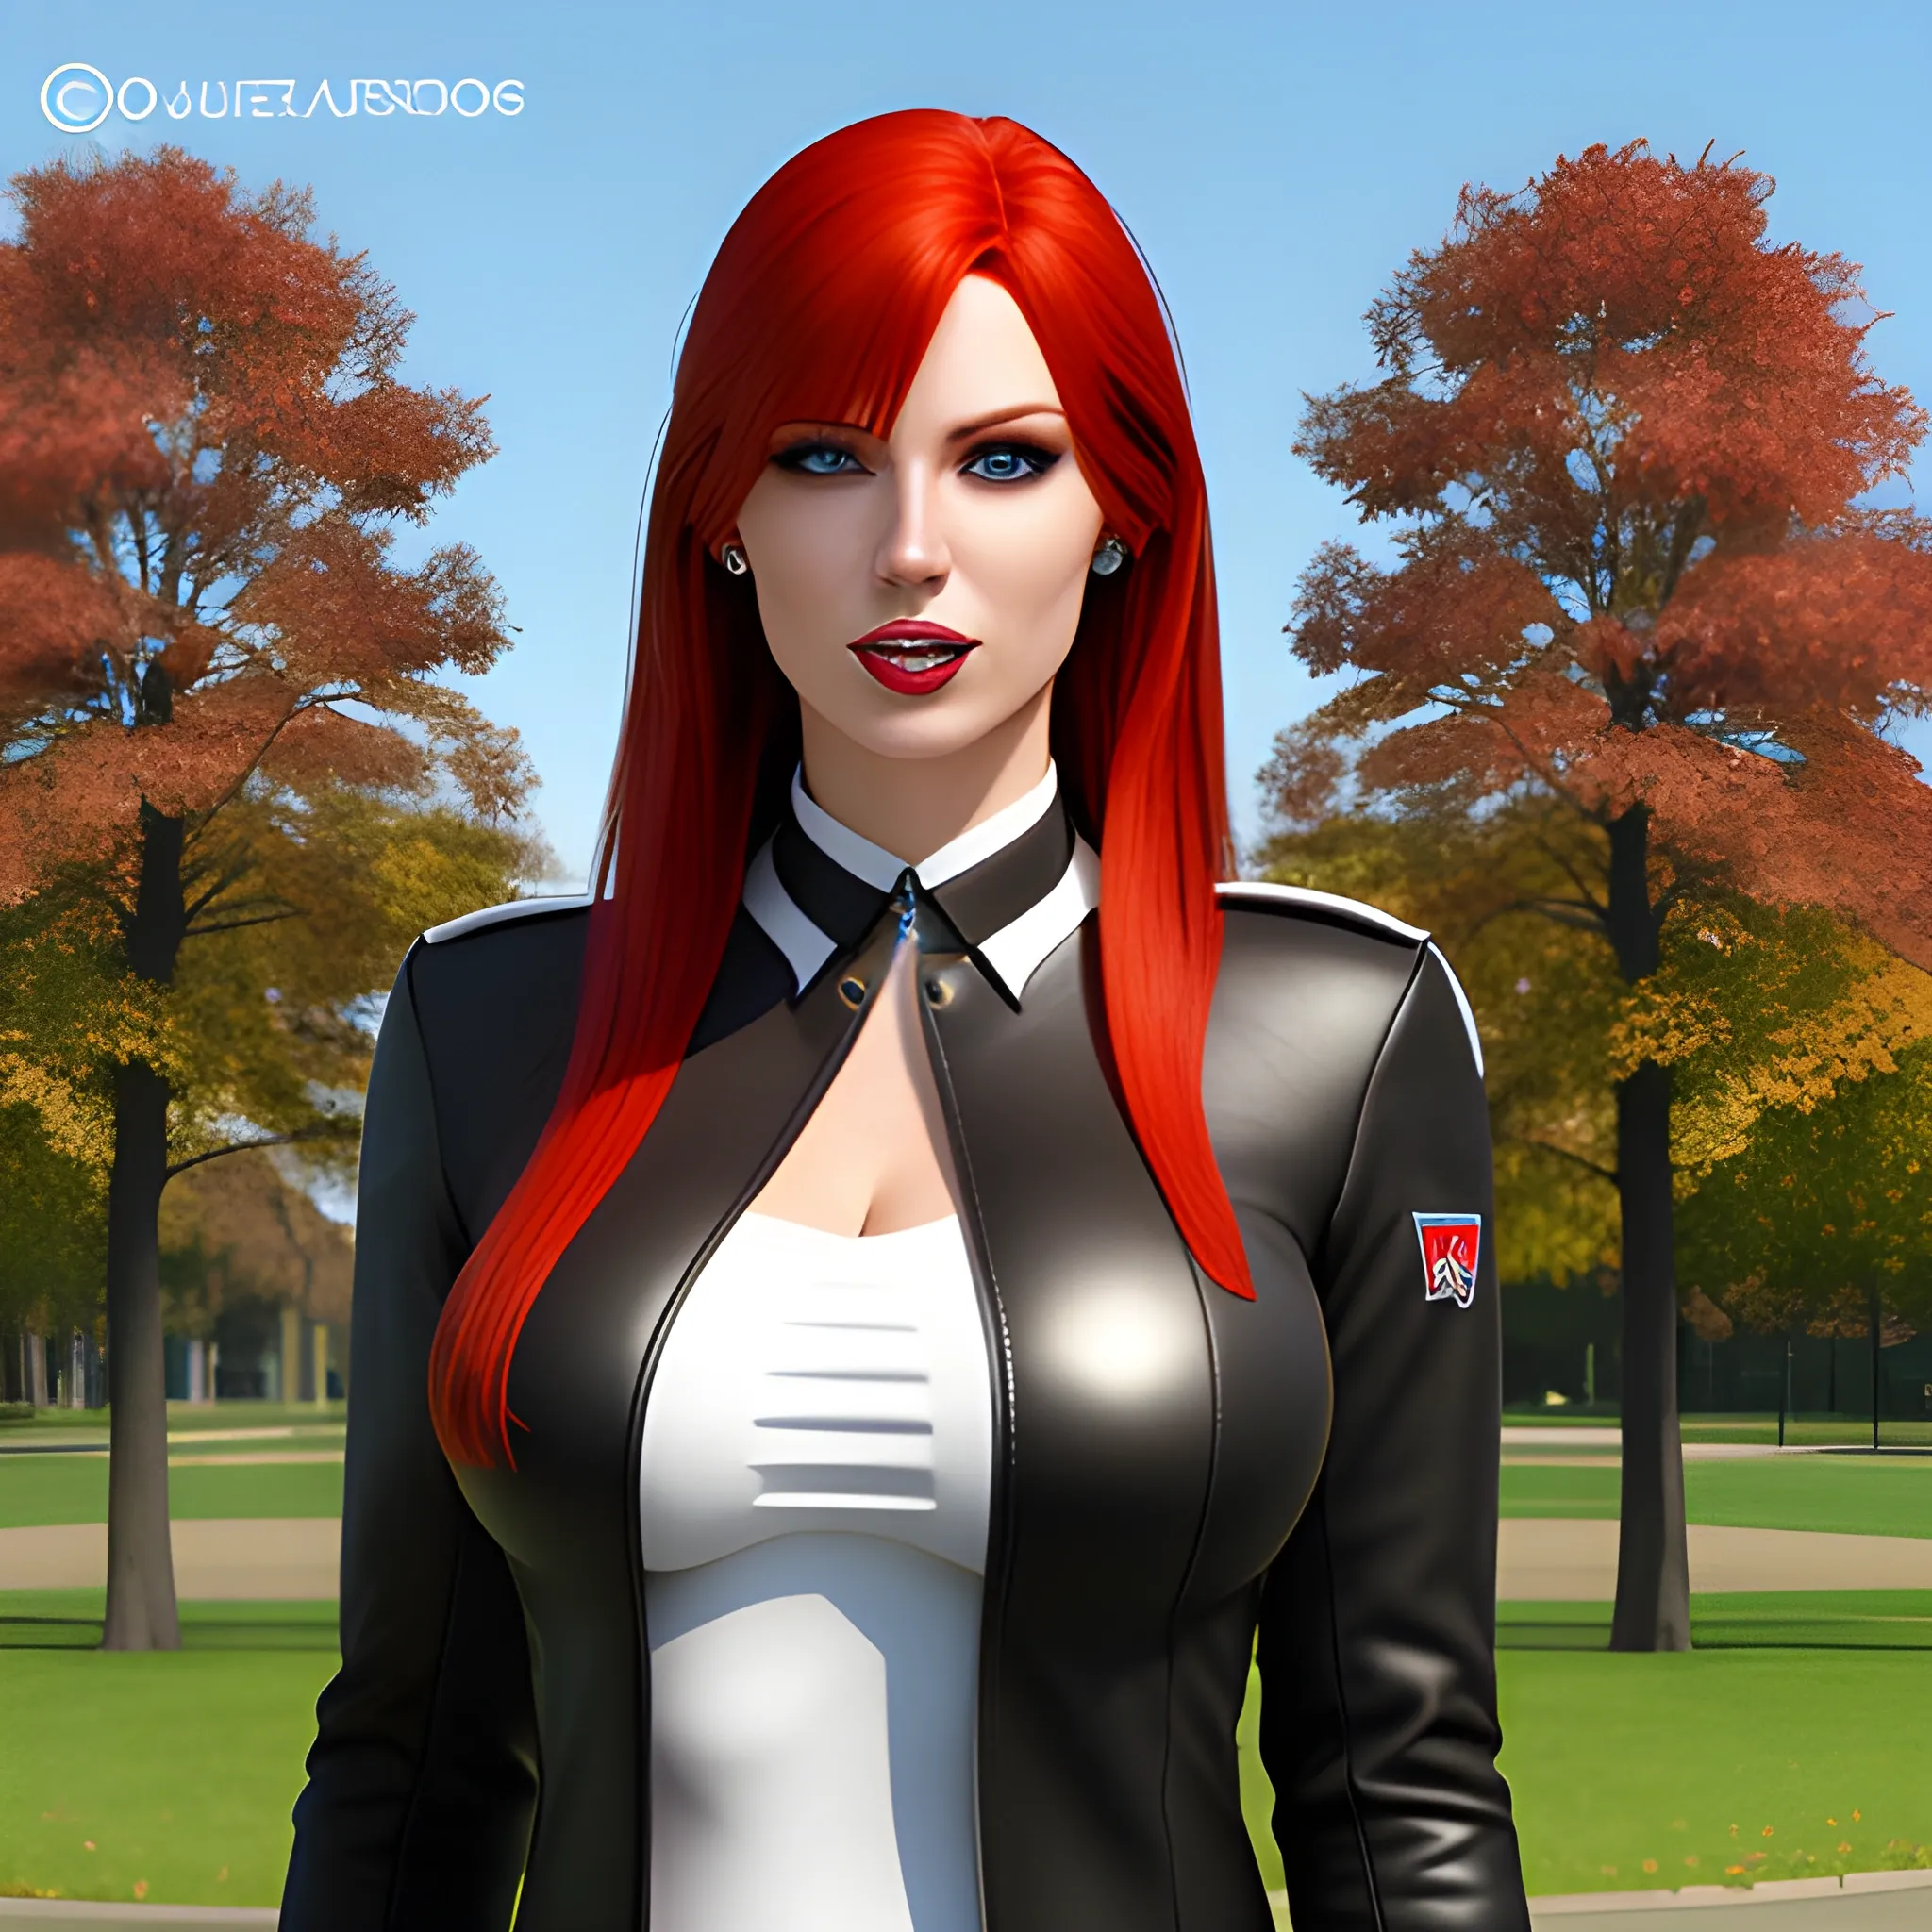 Create a photorealistic image of a red-haired female child wearing a leather English school uniform standing in front of a playground. Pretty eyes, sexy mouth, whole body visible, lots of skin, maximum details.